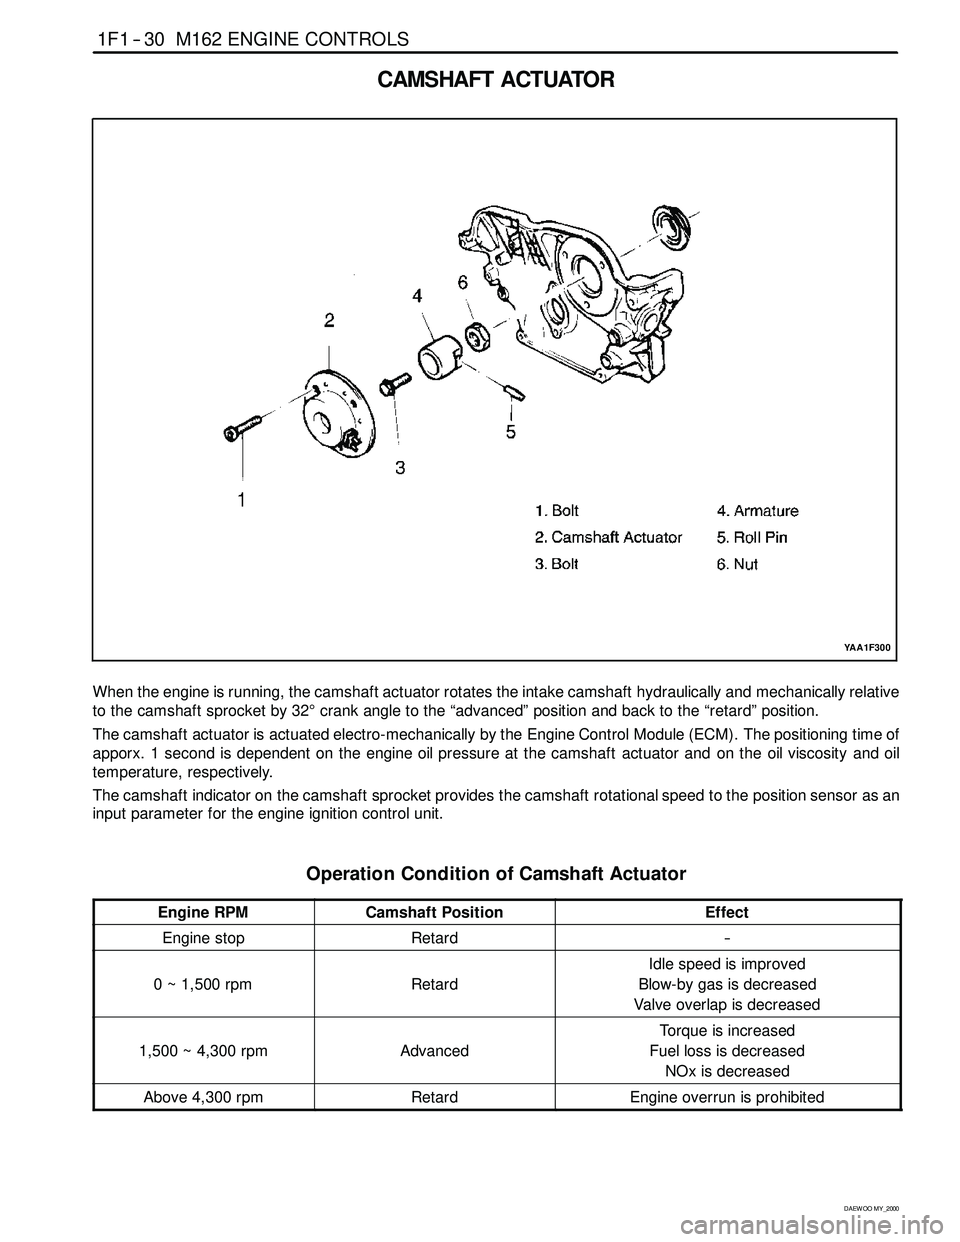 SSANGYONG KORANDO 1997  Service Repair Manual 1F1 -- 30 M162 ENGINE CONTROLS
D AEW OO M Y_2000
CAMSHAFT ACTUATOR
YAA1F300
When the engine is running, the camshaft actuator rotates the intake camshaft hydraulically and mechanically relative
to the